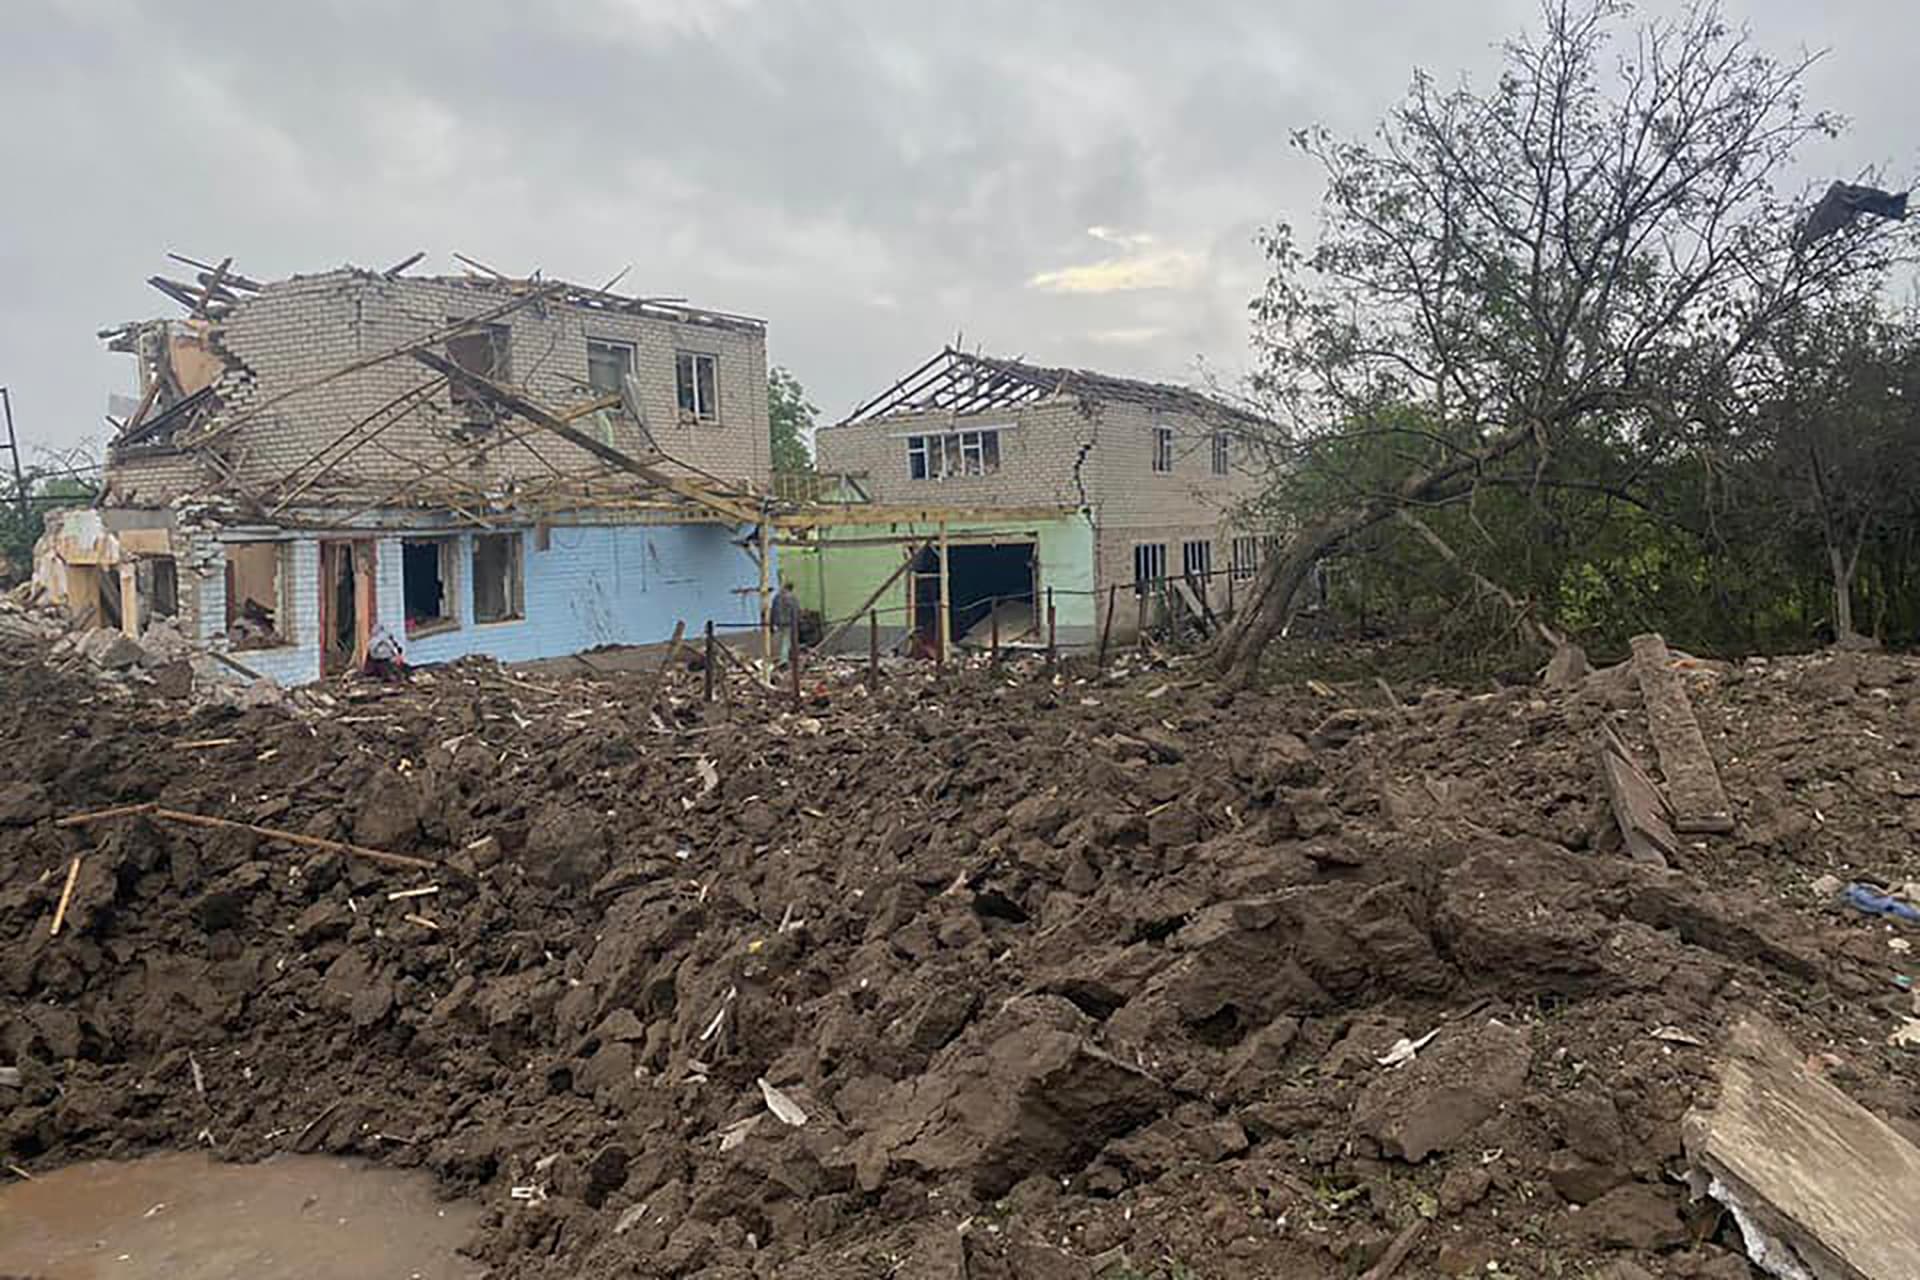 A rocket crater is seen against the background of the private houses damaged in the deadly morning Russian rocket attack in Kramatorsk